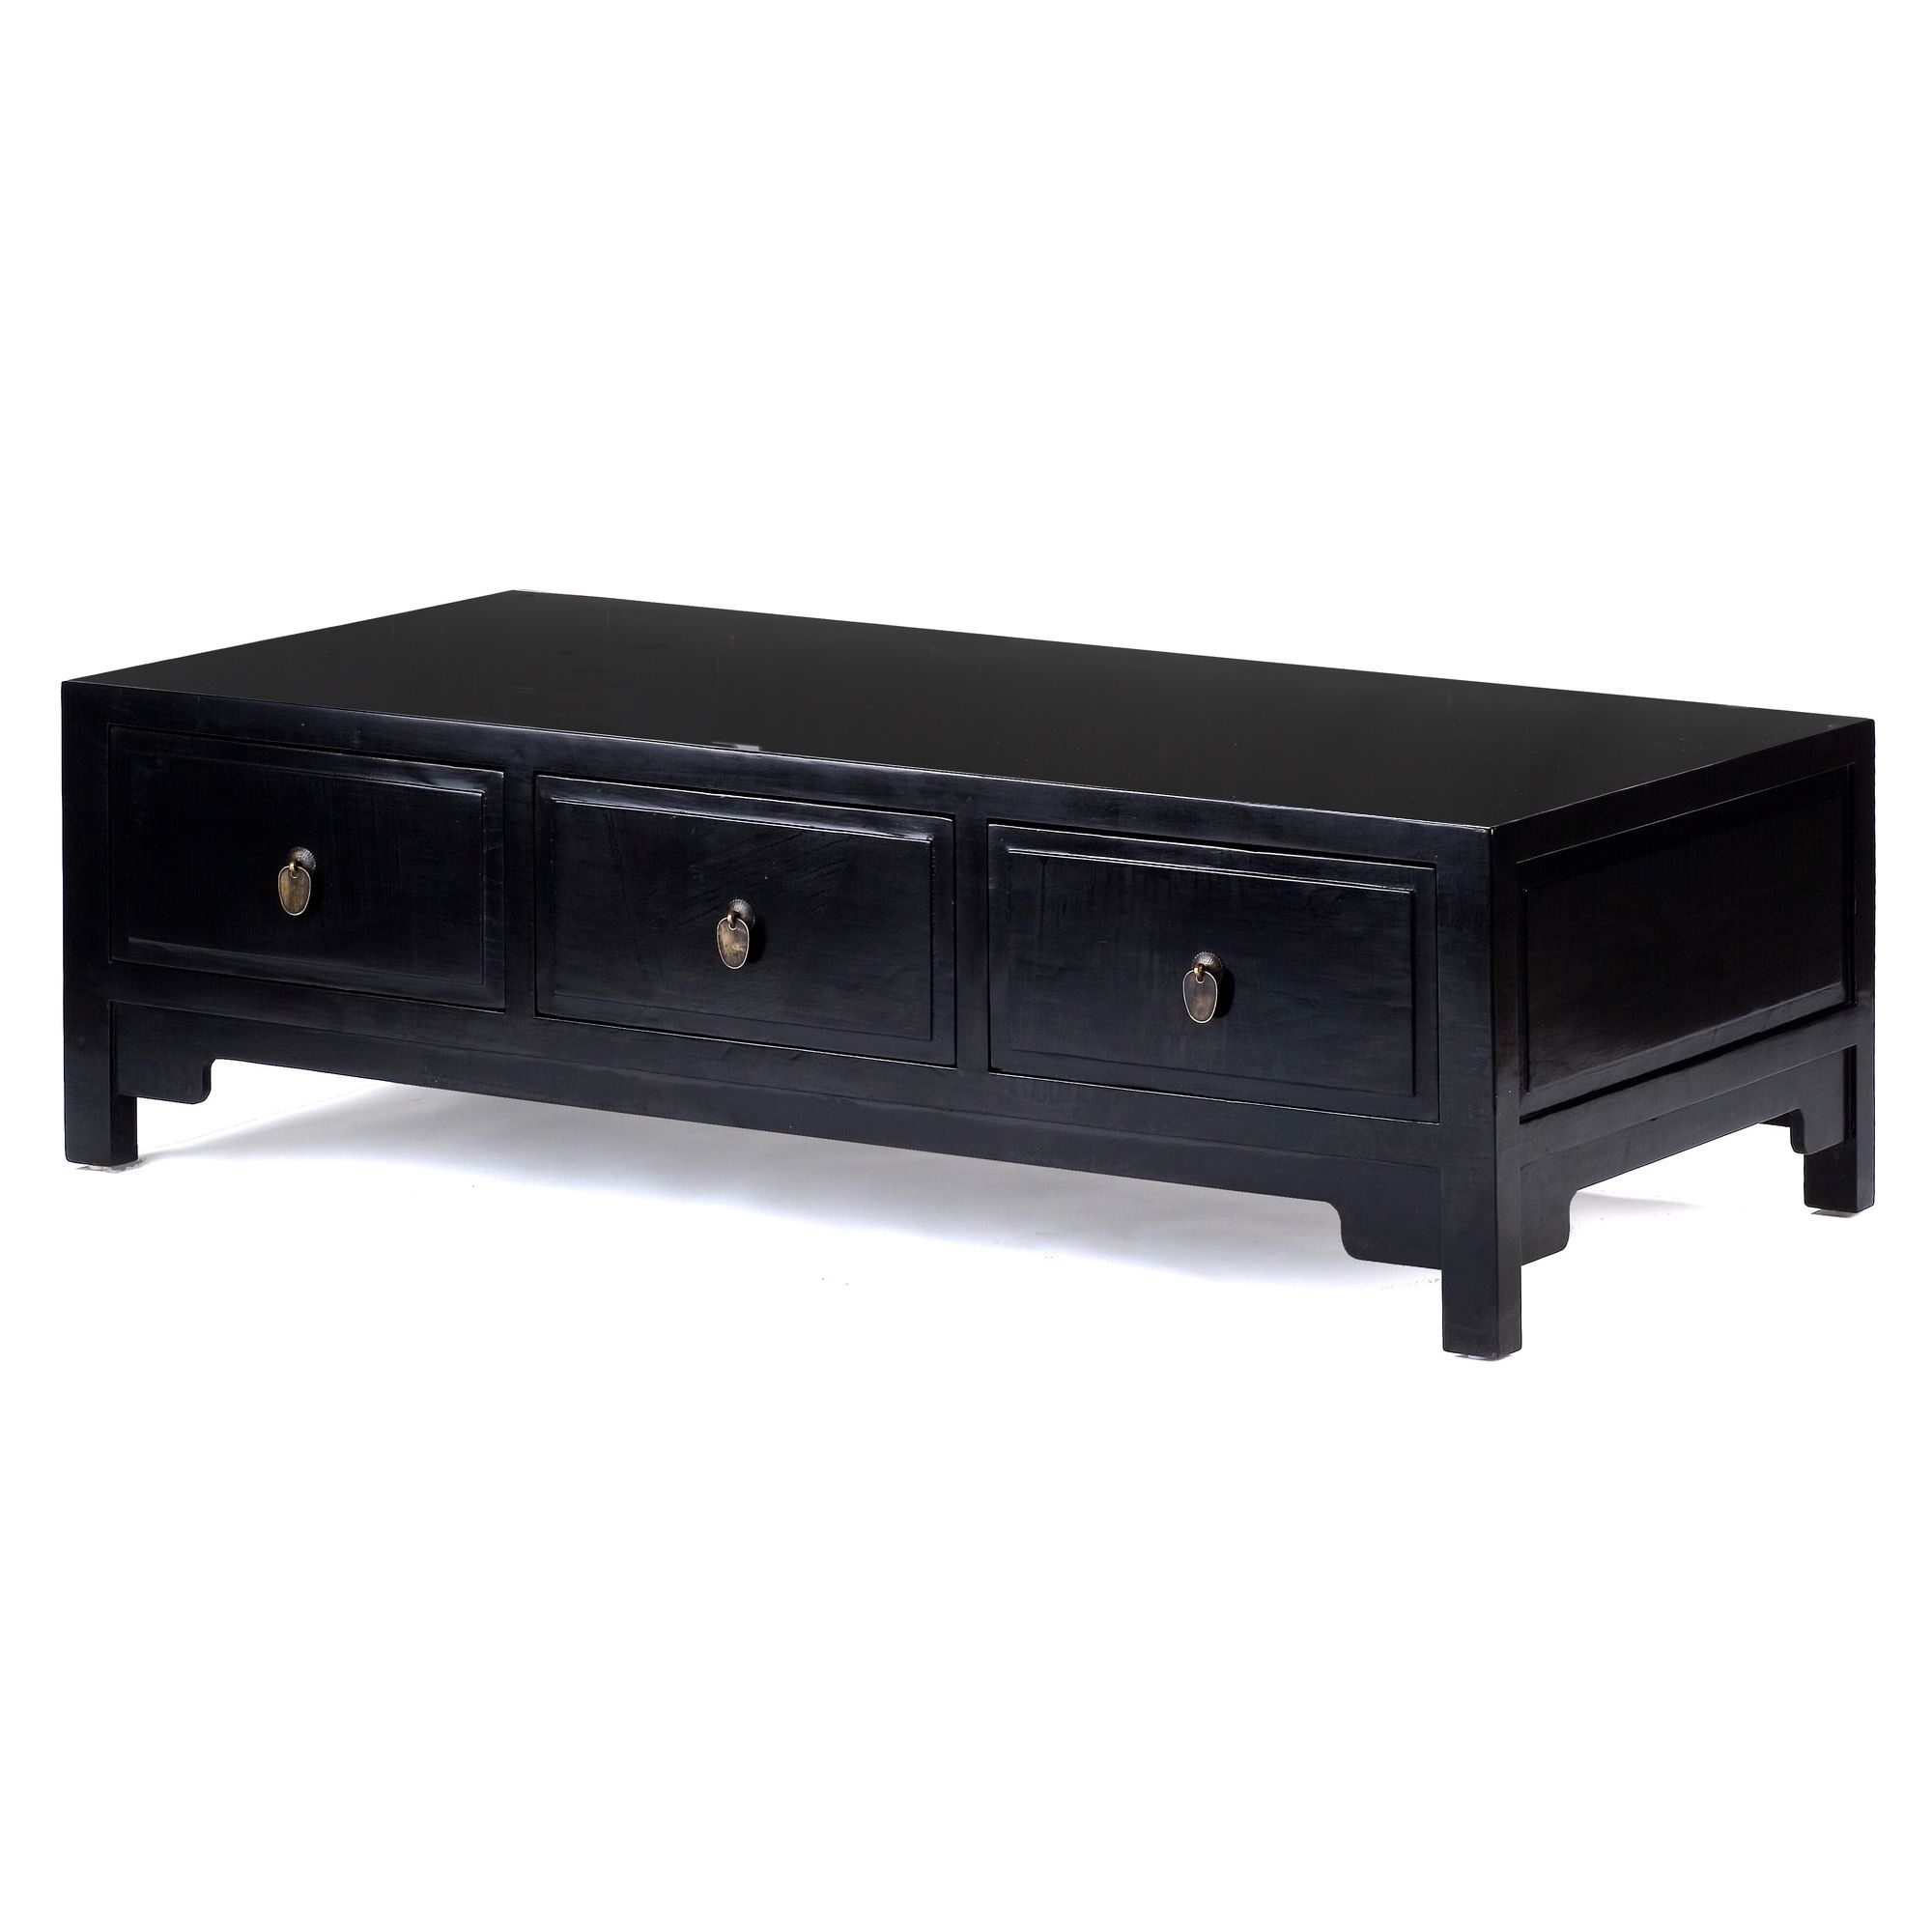 Shimu Chinese Classical Three Drawer Kang Table - Black Lacquer at Tesco Direct